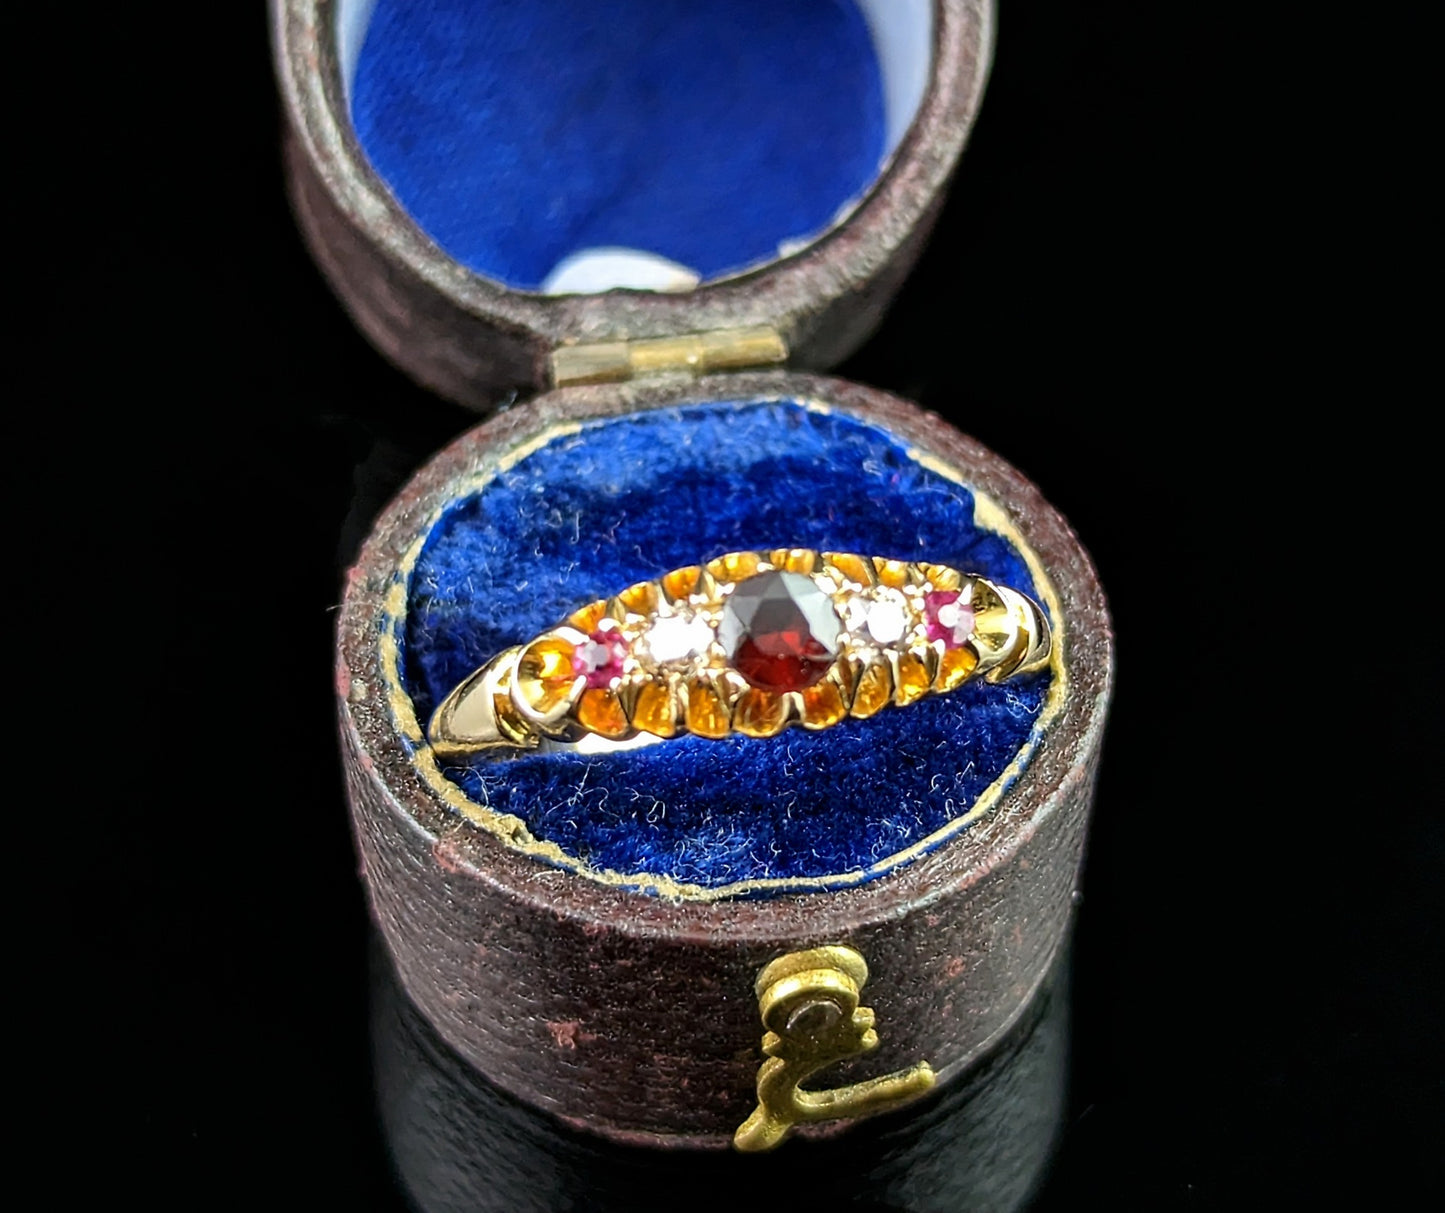 Antique Garnet, Ruby and Diamond ring, 18ct gold